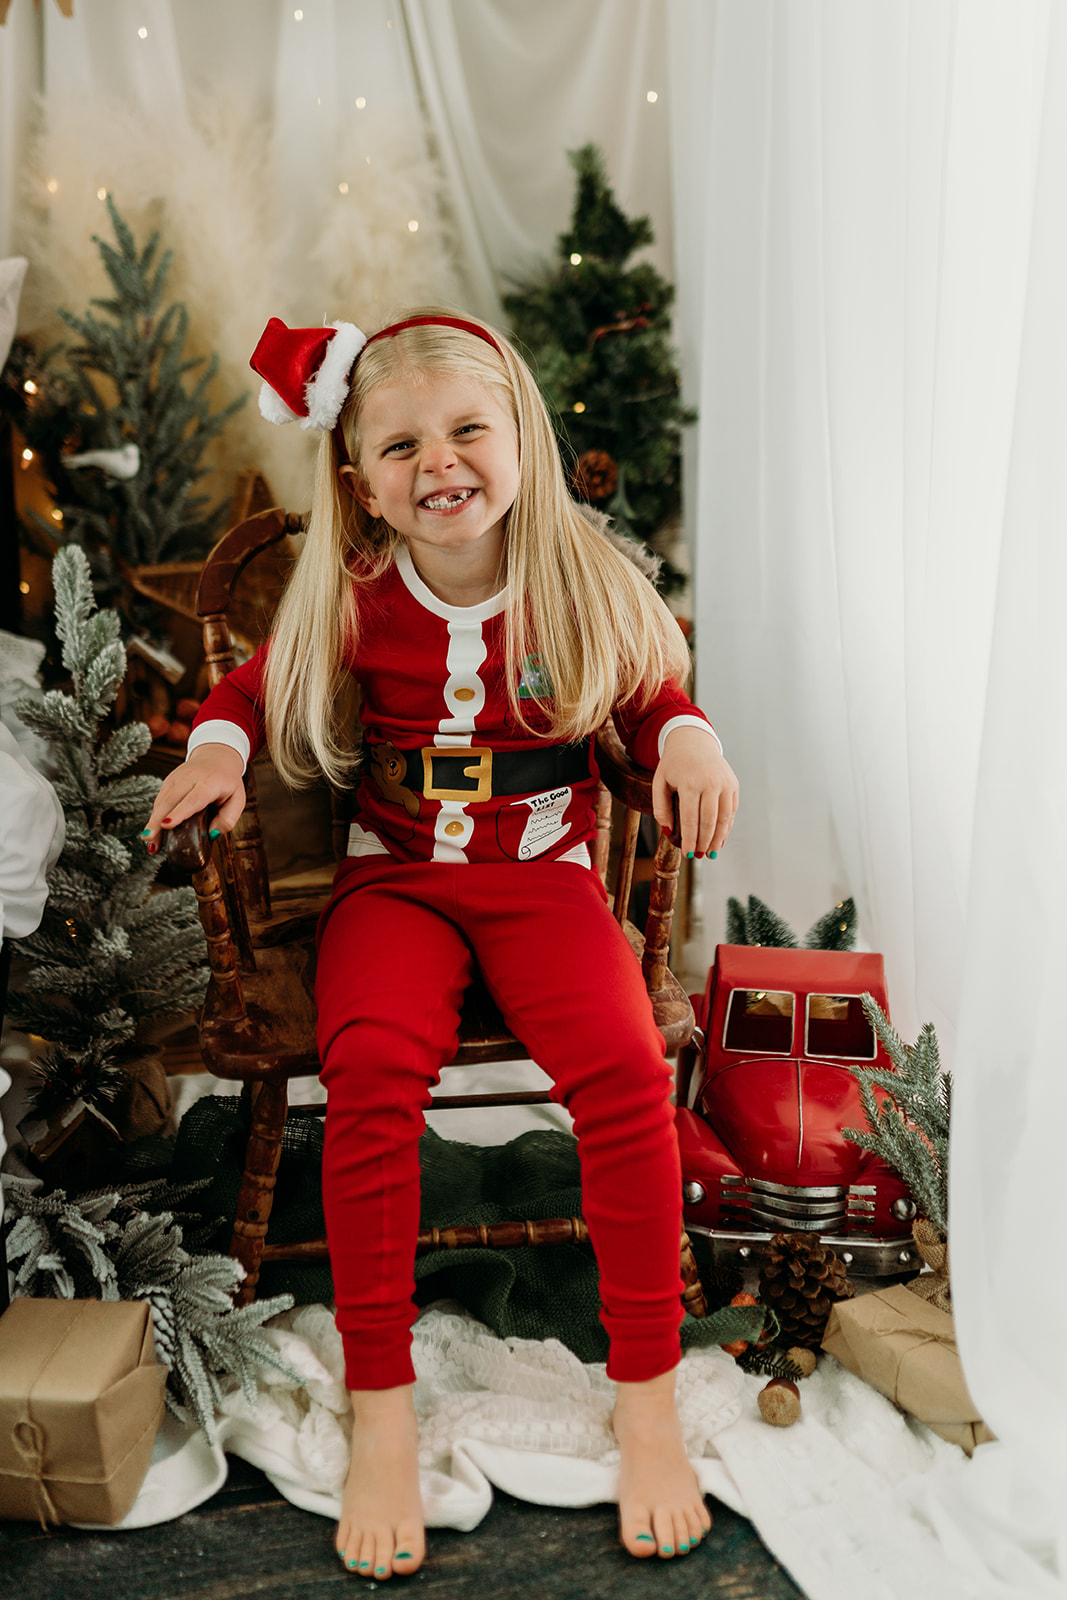 Merry Moments by Heather Ann Photography in Colorado Springs